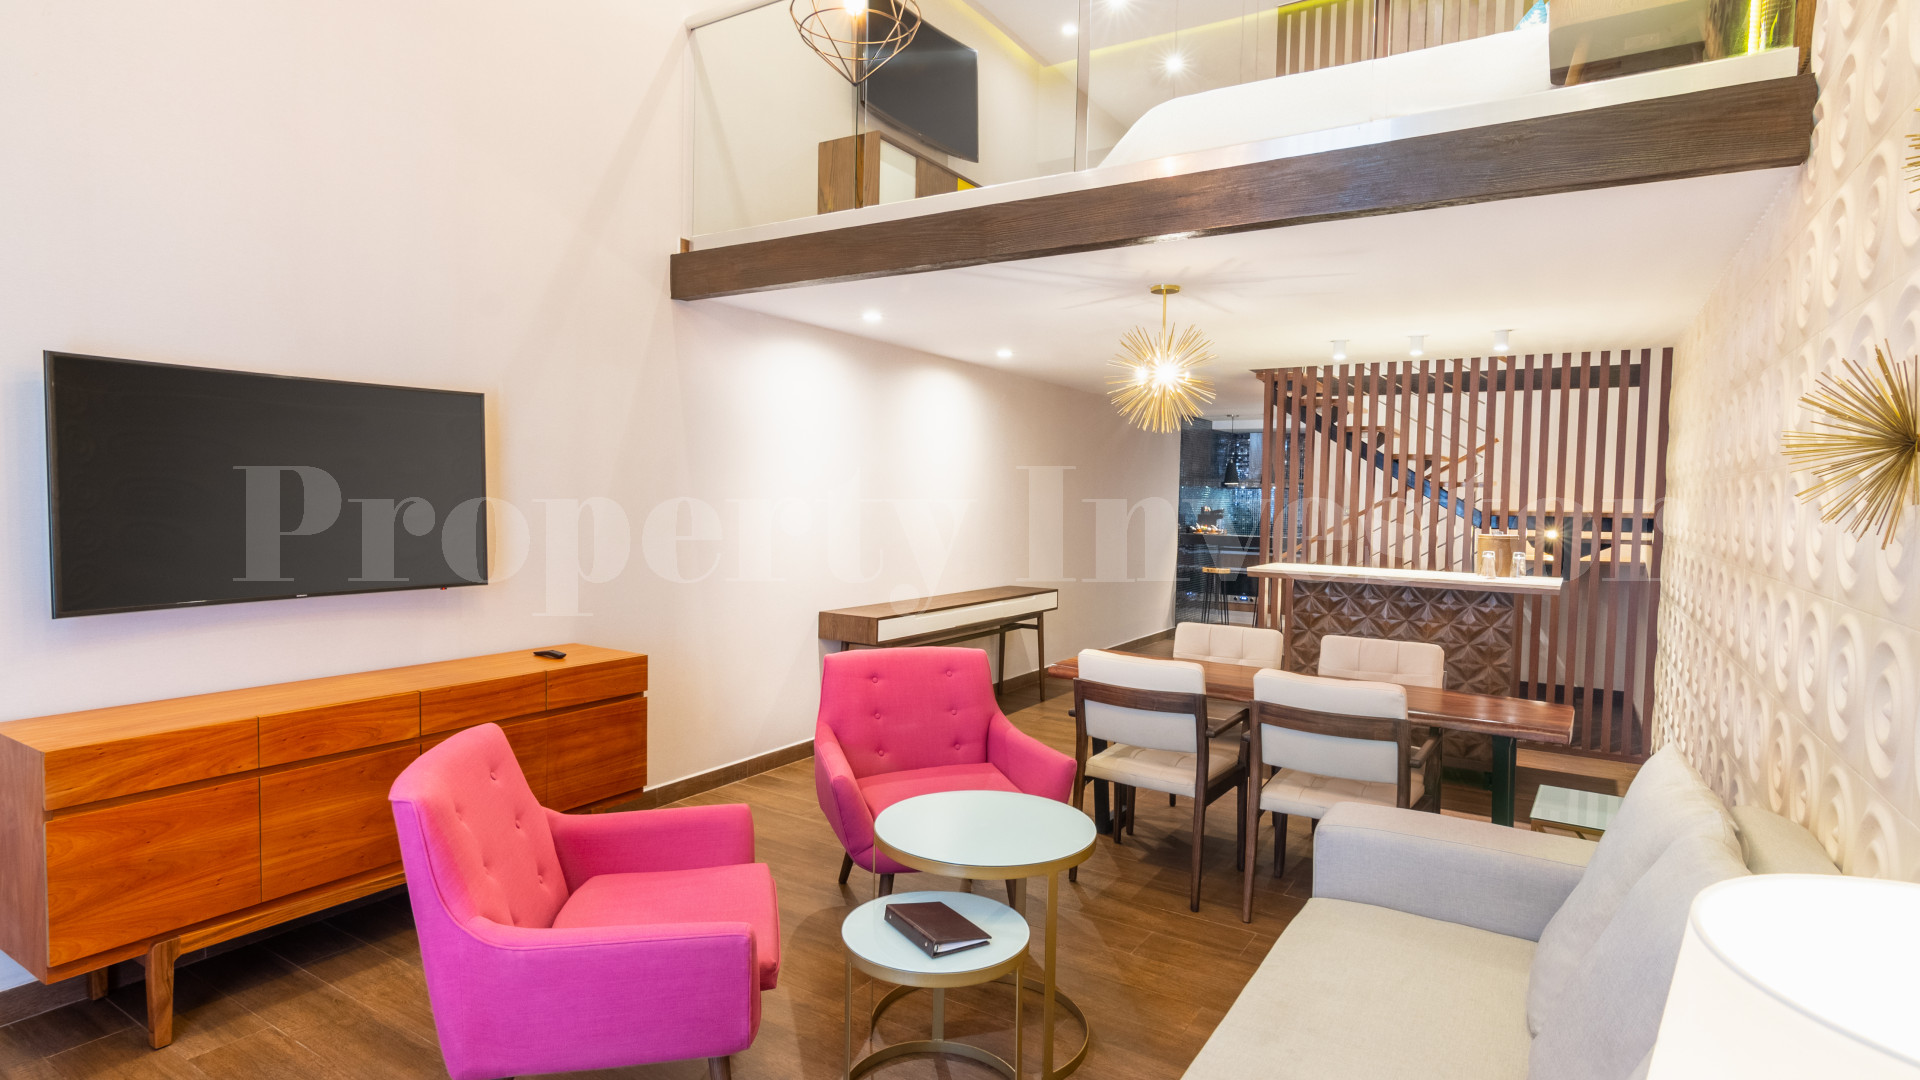 Exclusive 1 Bedroom Boutique Hotel Investment in Playa del Carmen (Unit 423)